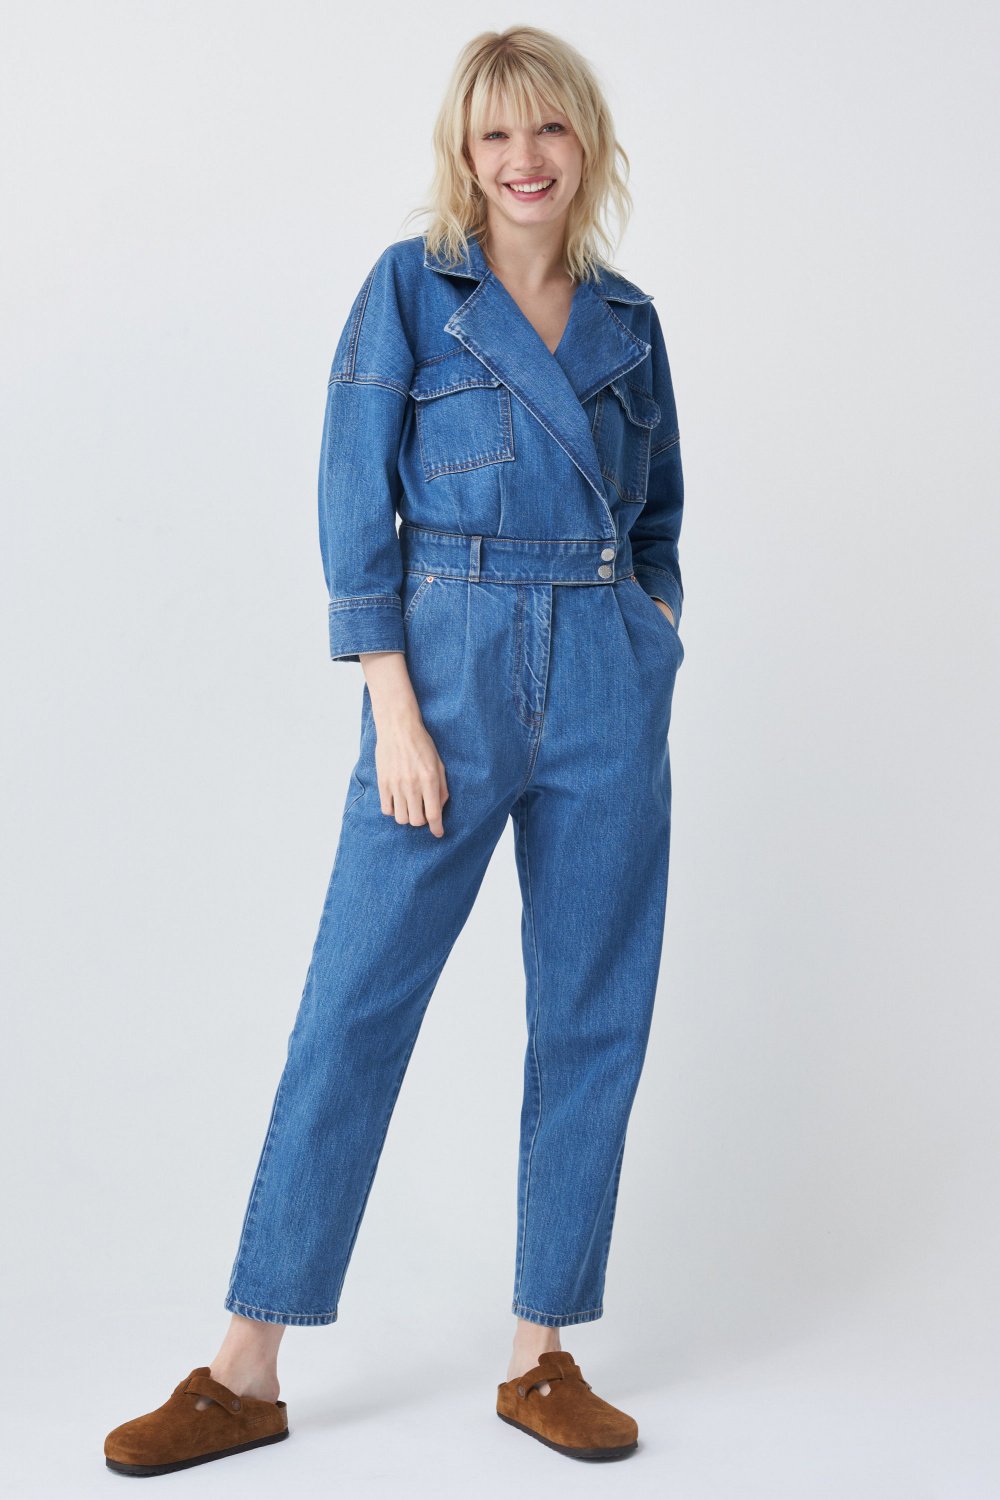 Denim overall jumpsuit with collar - Salsa